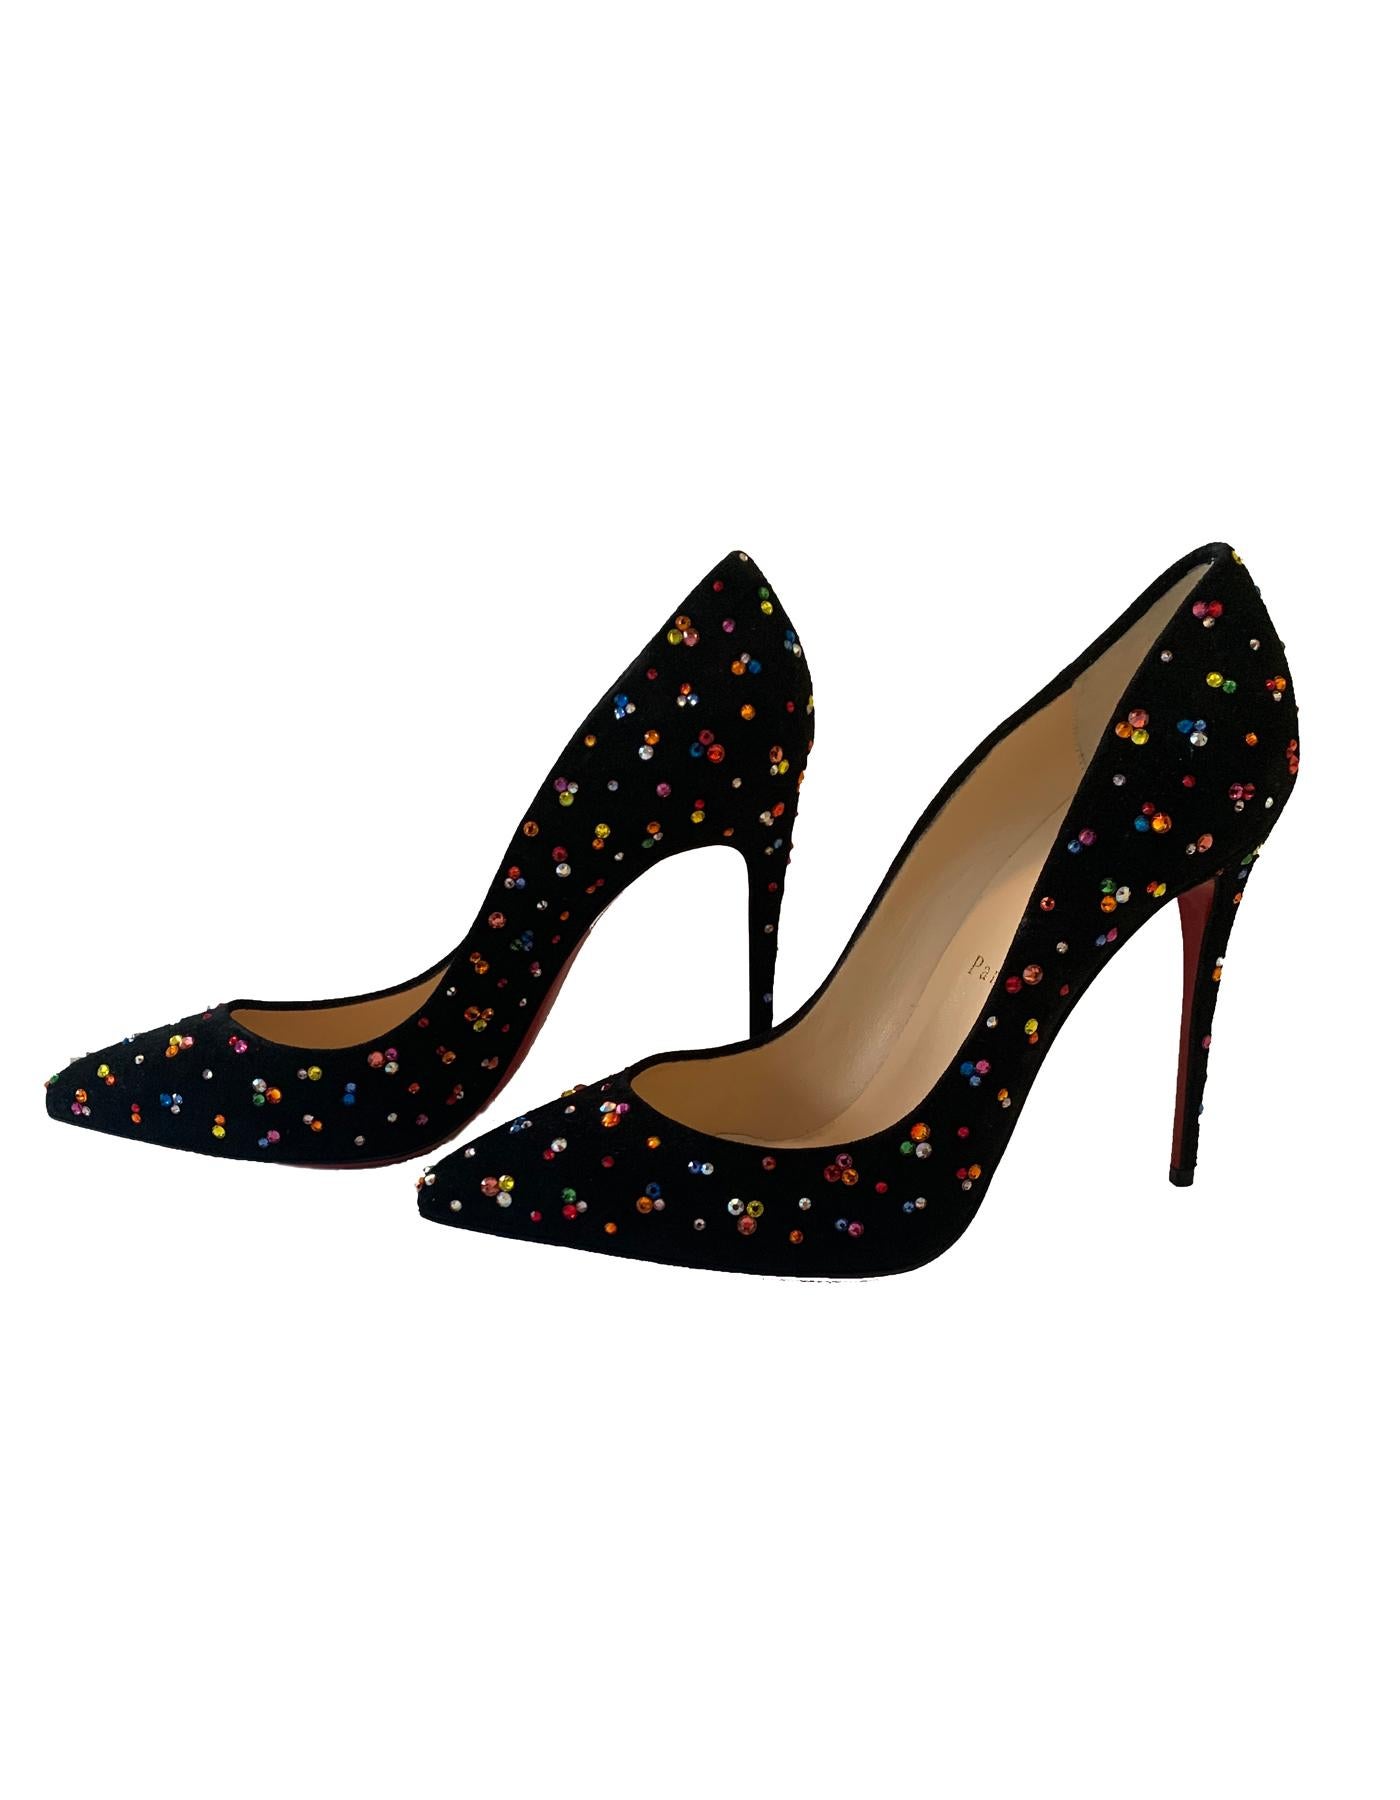 Christian Louboutin Black Suede/ Multicolor Crystal Clair De Lune Pigalle Follies 120 Pumps sz 39.5

Made In: Italy
Color: Black with multicolor crystals
Materials: Suede and strass crystals
Closure/Opening: Slide on
Overall Condition: Like new with